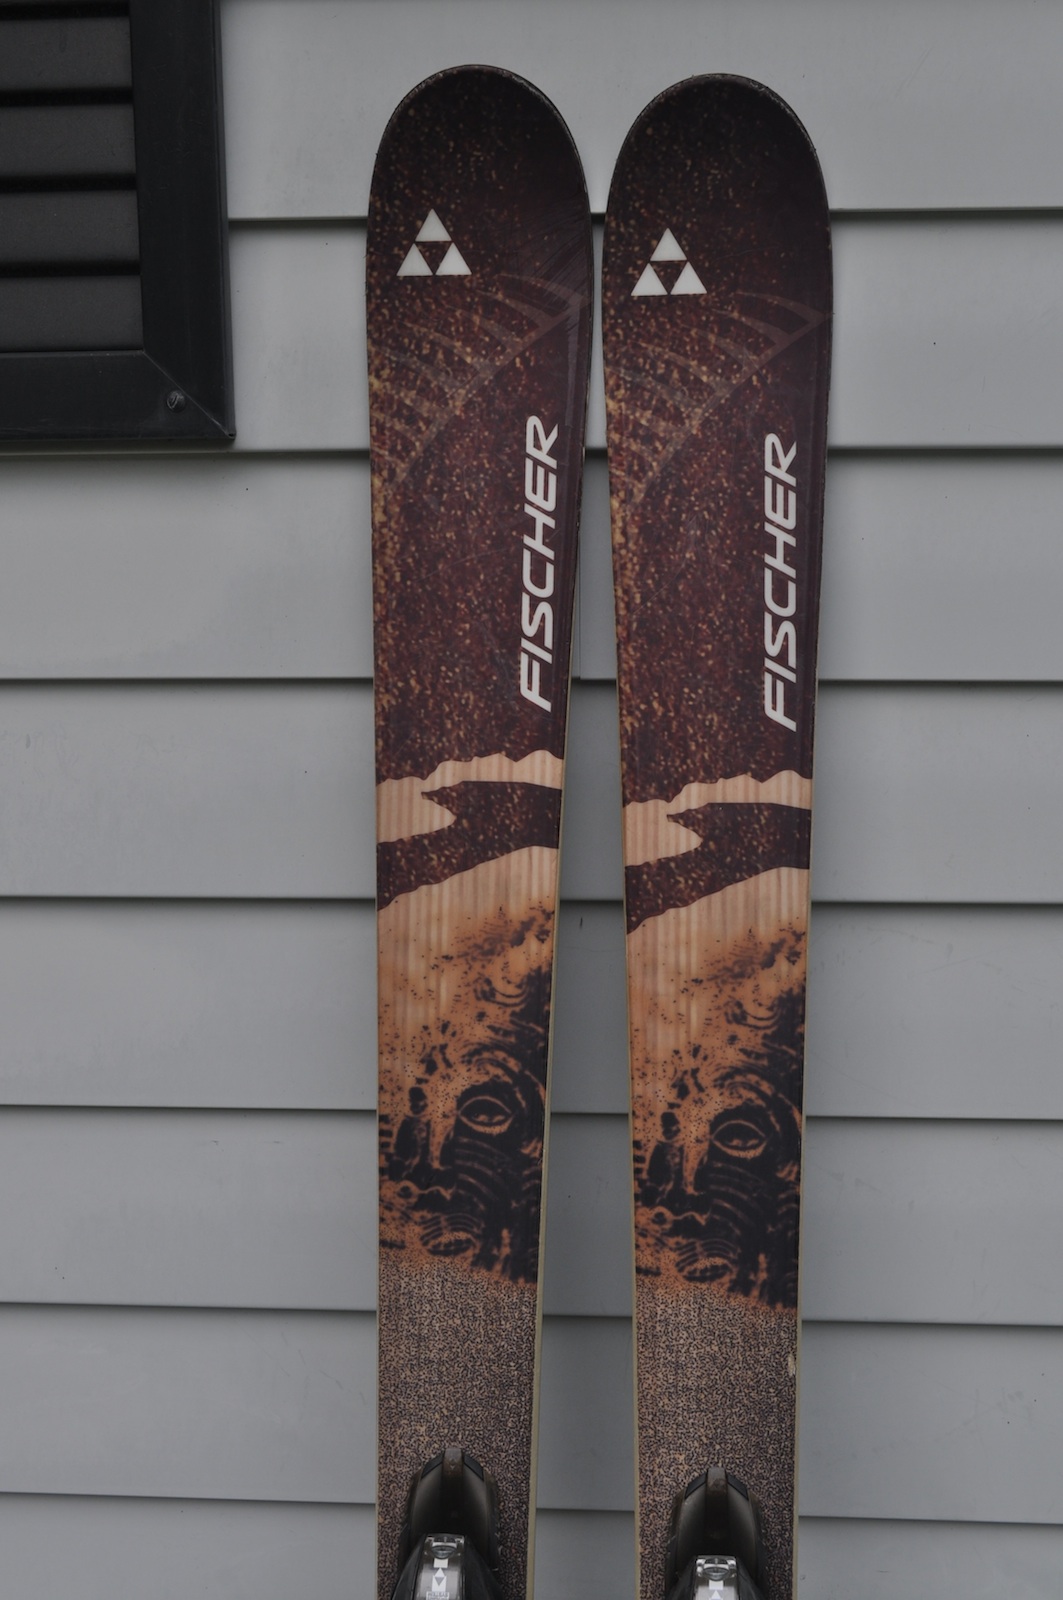 On the right side of the right ski, just above the bindings you can see a small chip.  The only ding on these skis.